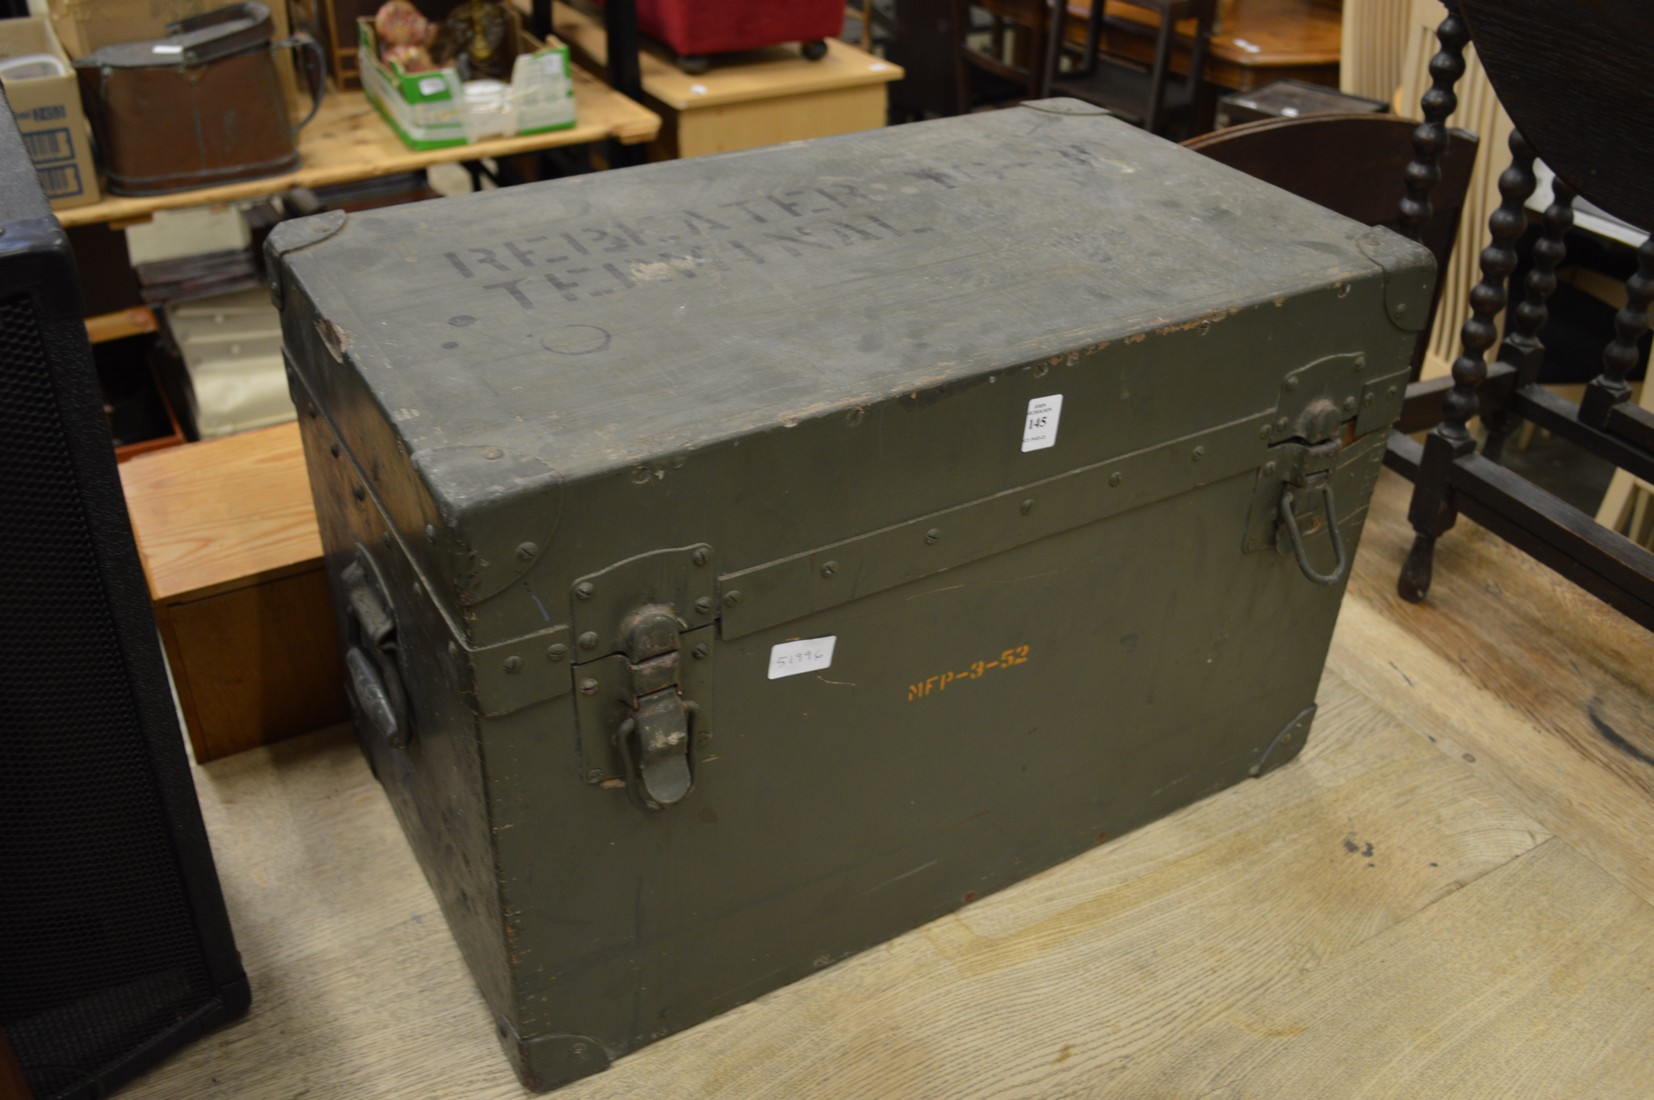 A military trunk.